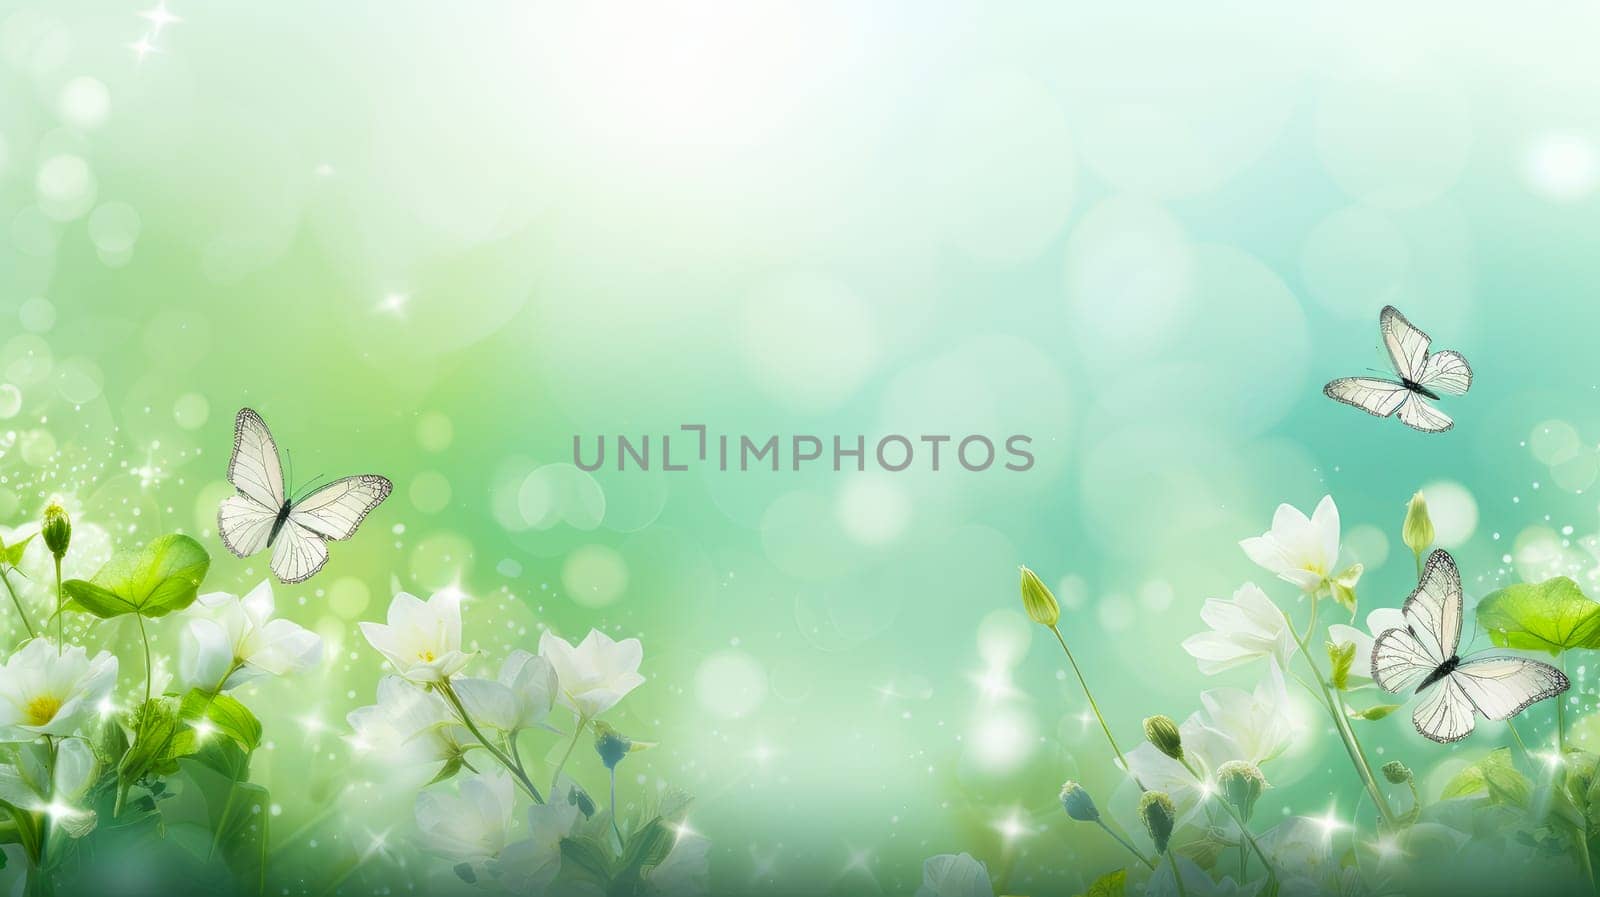 Abstract natural spring background with butterflies and light green meadow flowers close-up. Colorful artistic image with soft focus and beautiful bokeh in summer spring